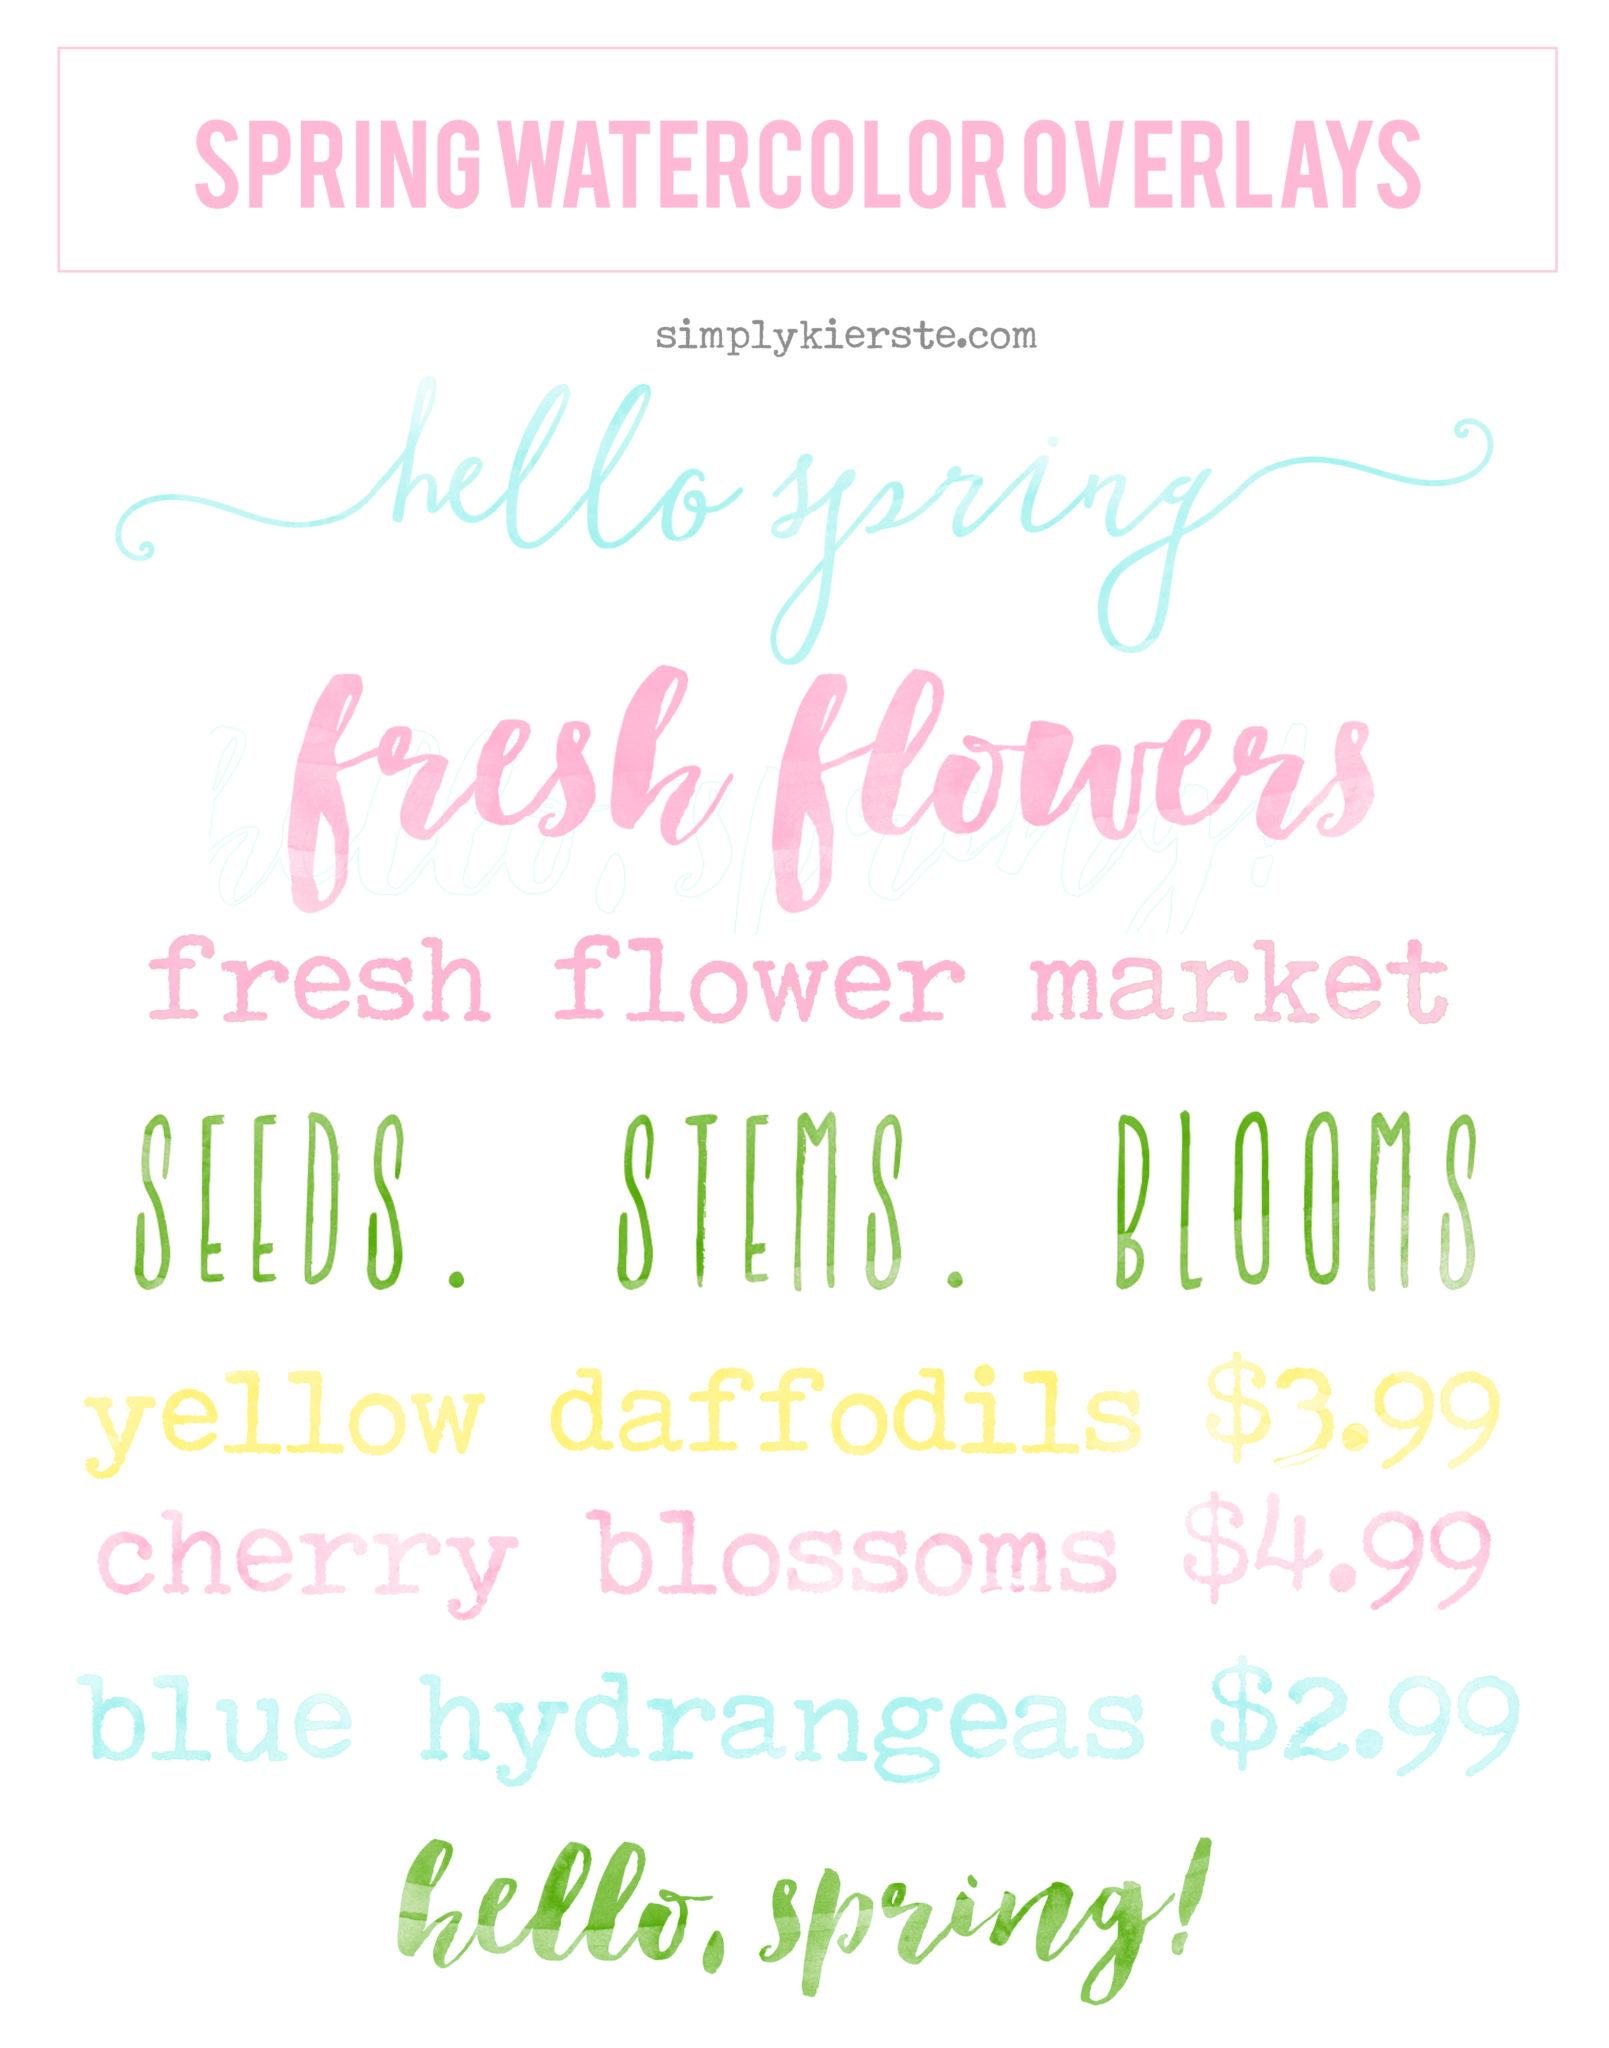 Watercolor Spring Overlays